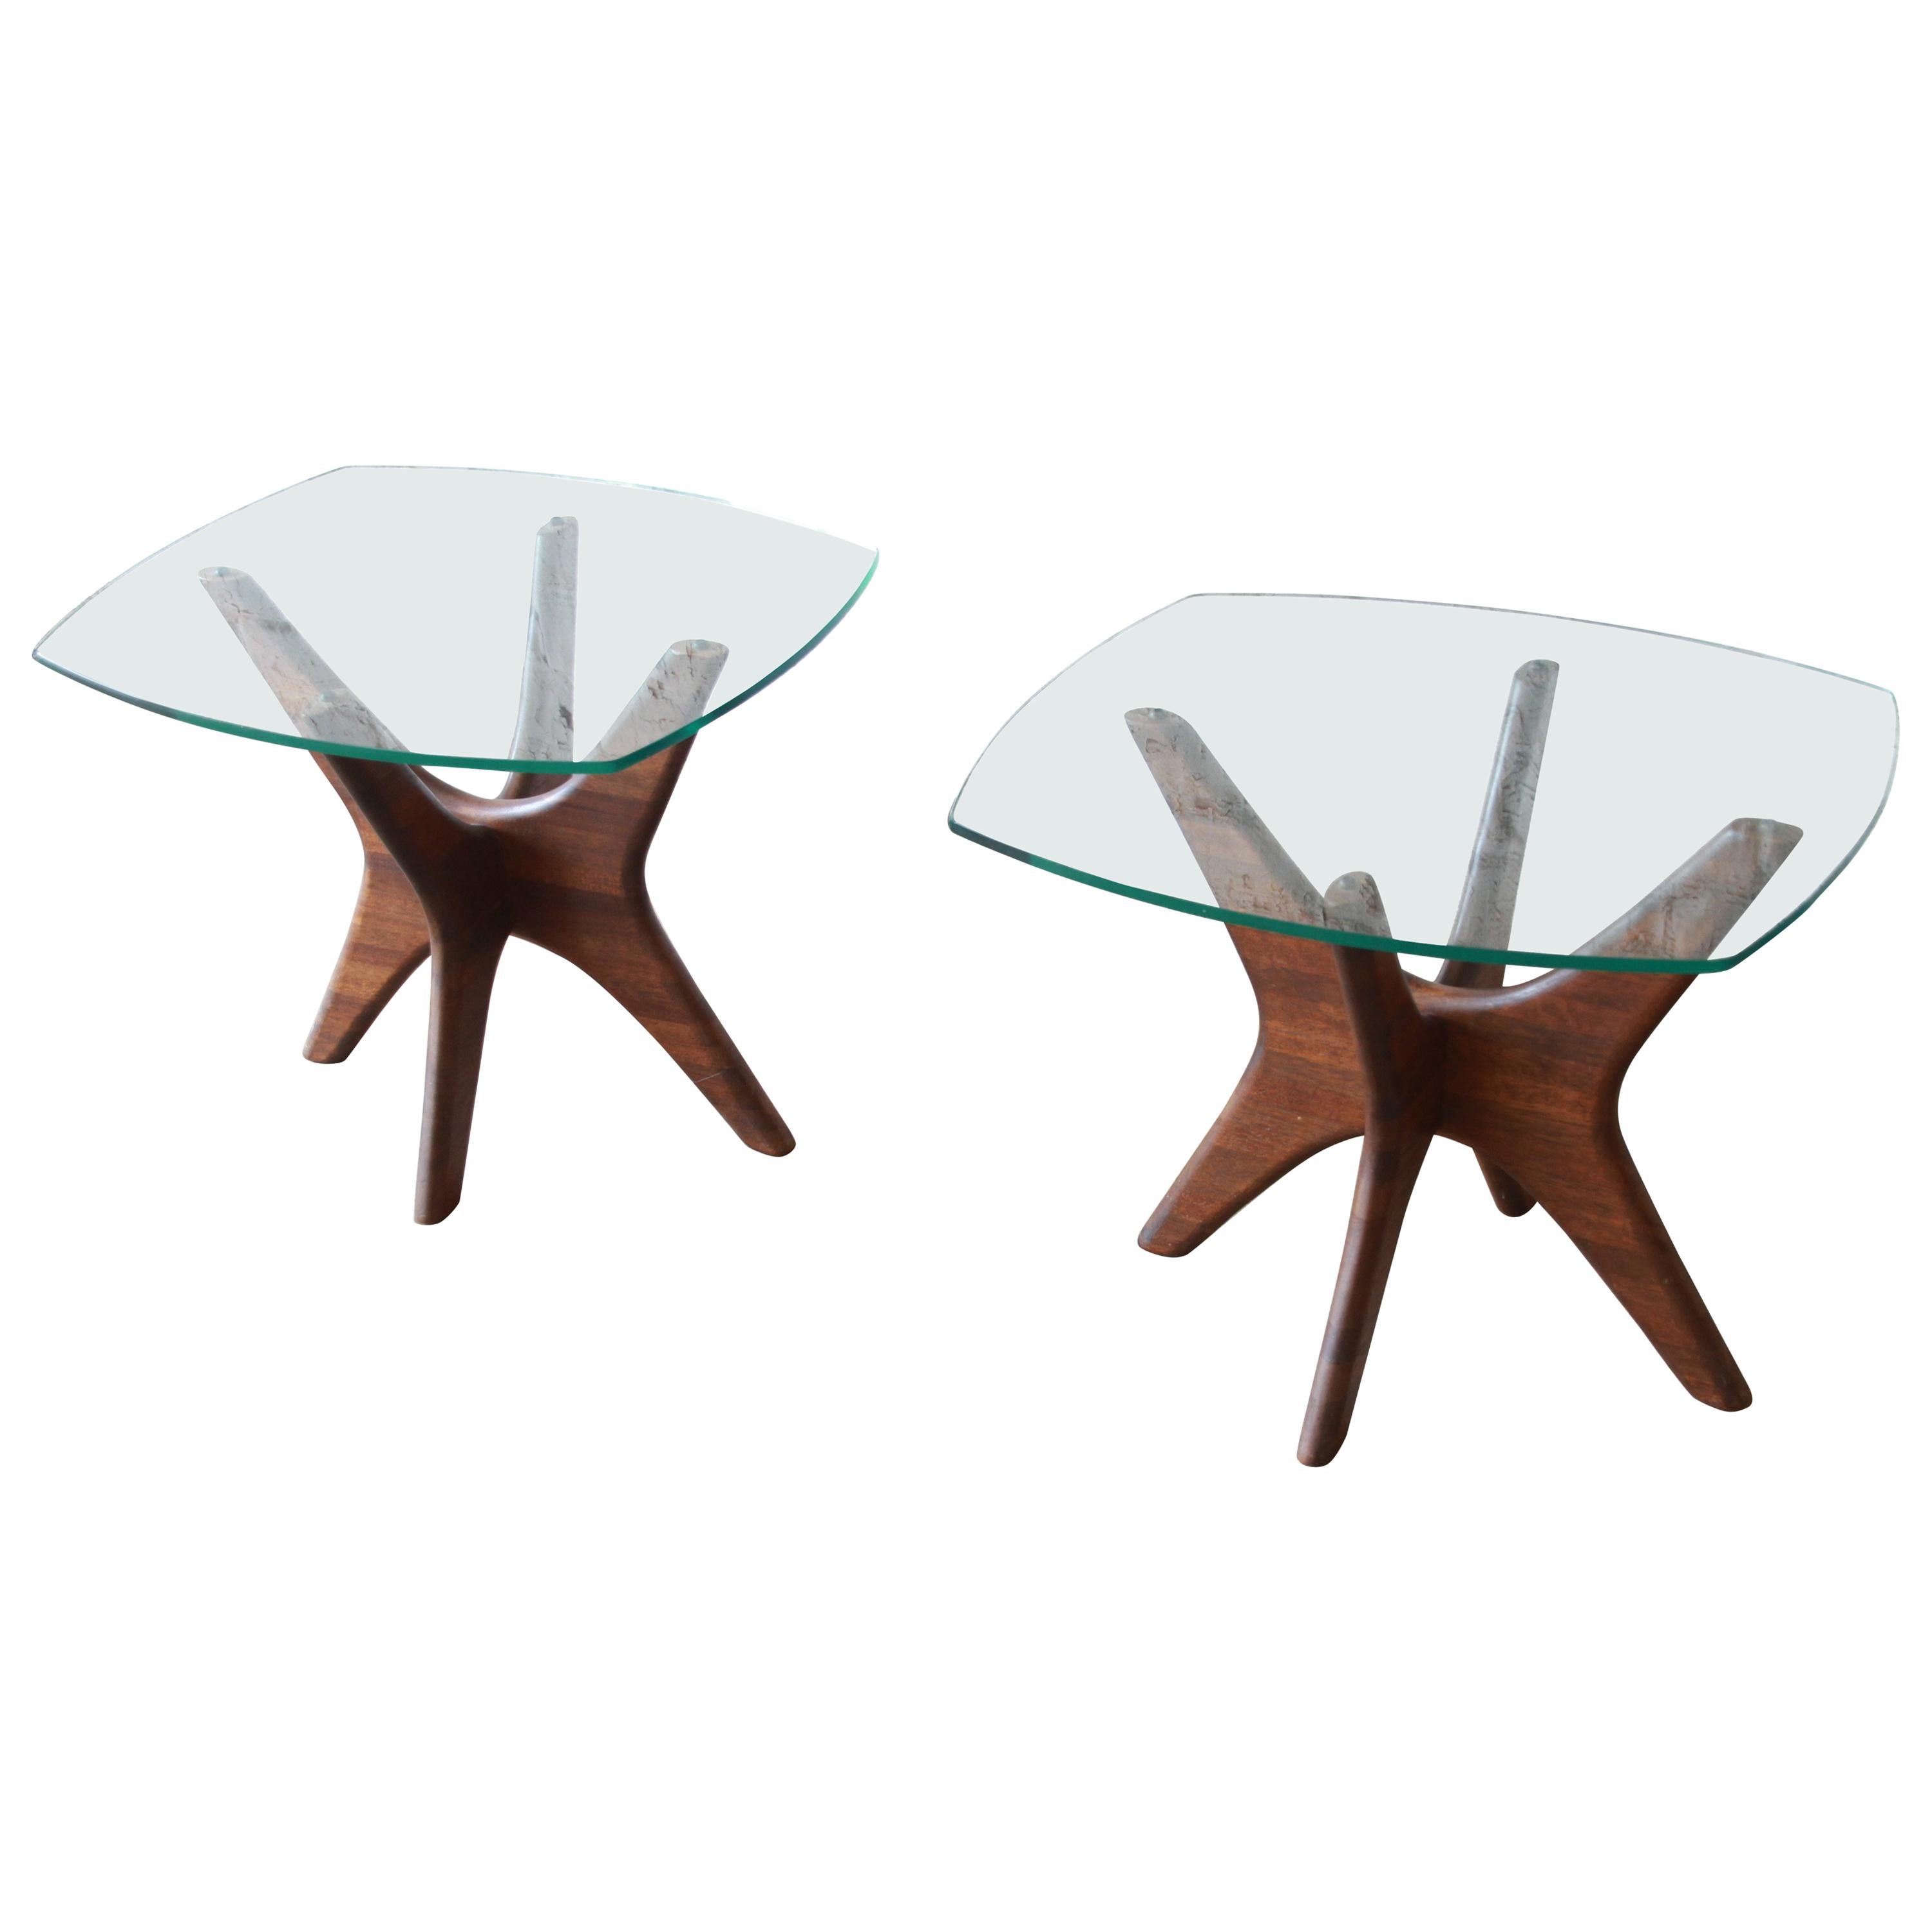 Adrian Pearsall for Craft Associates "Jacks" Side Tables, Pair